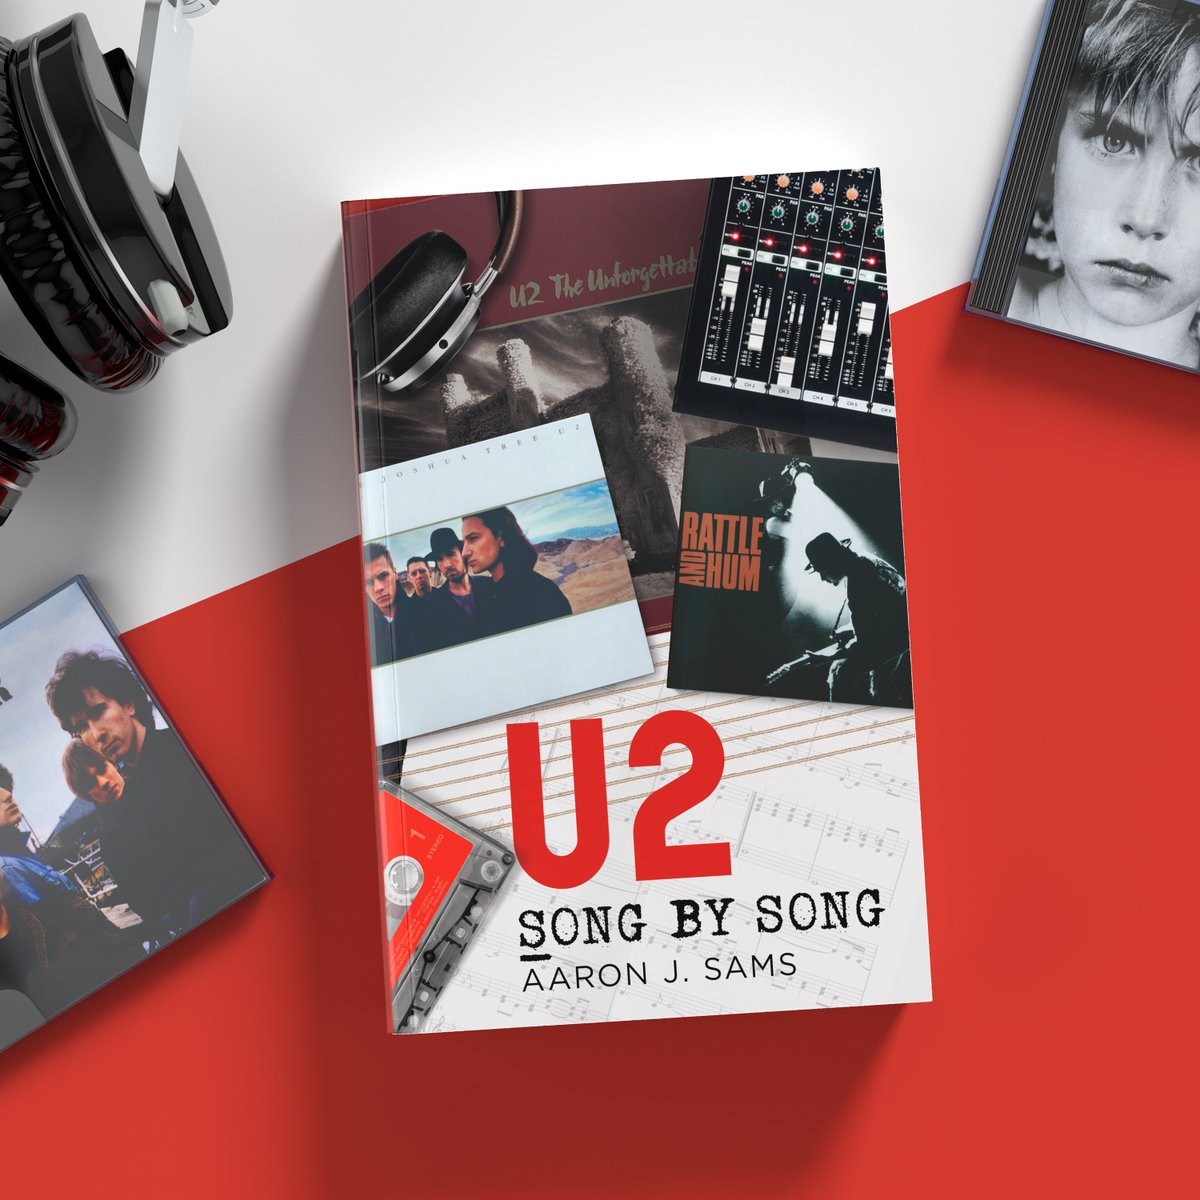 With 'U2 Song by Song' now out, Don Morgan takes some time to speak with the author, @u2wanderer, about this new book about the songs of #U2. 
Interview here: u2songs.com/news/the_book_…
#SongBySong